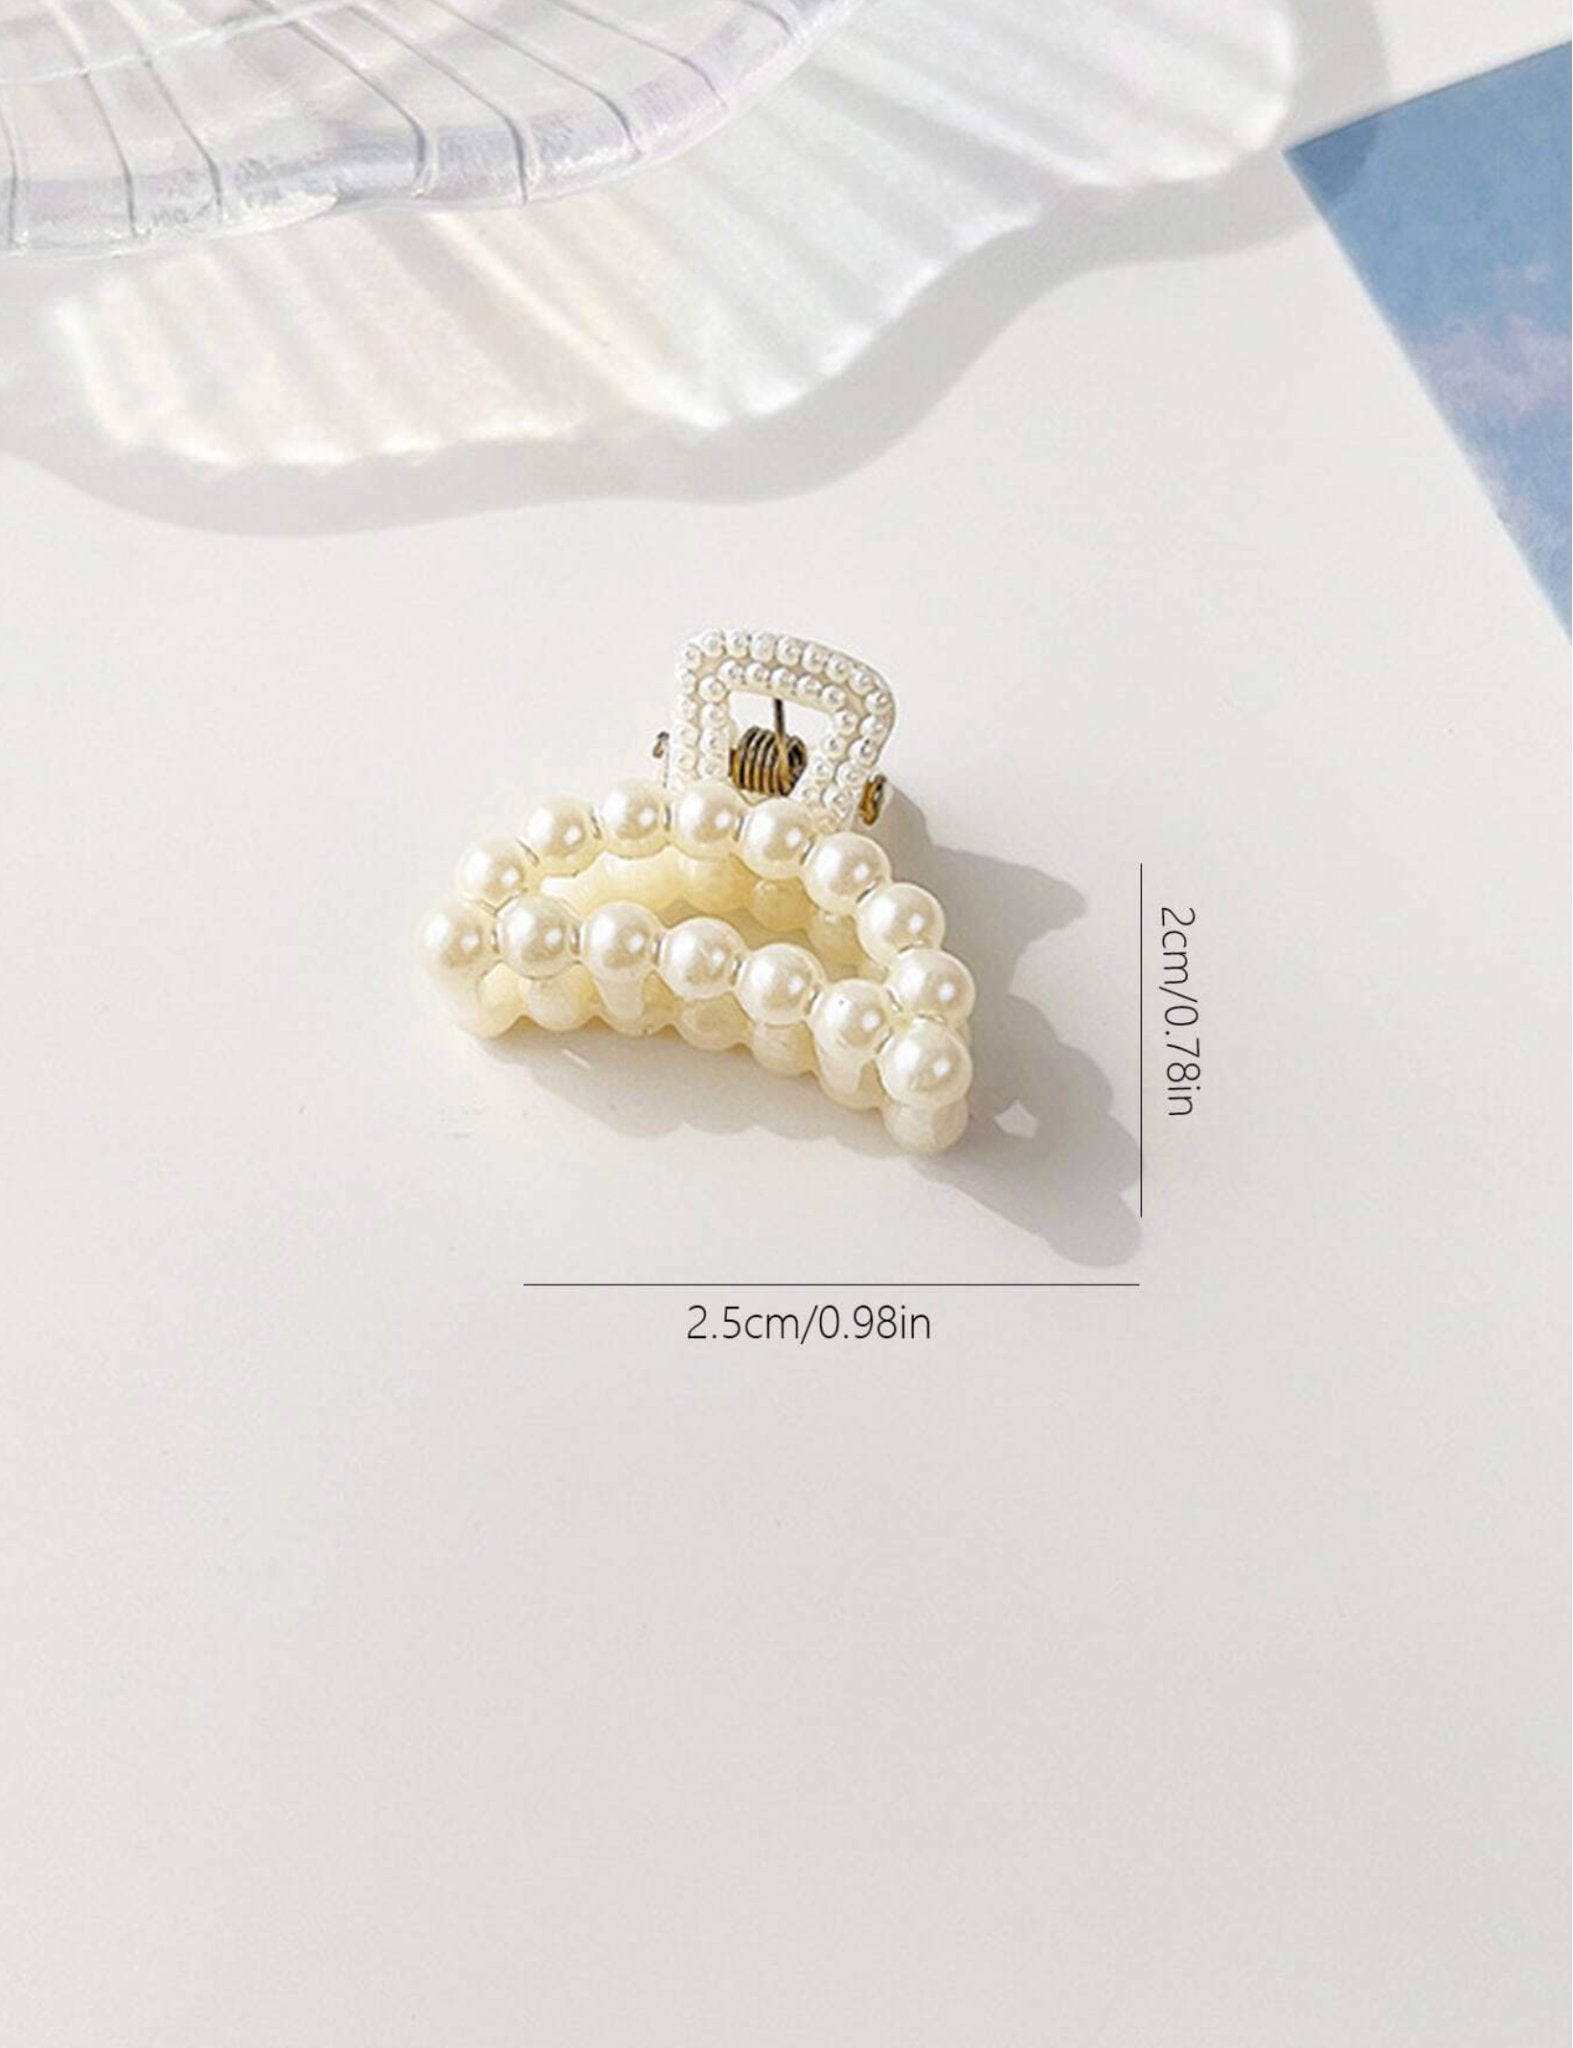 Mini Pearl Hair Claw Clips - Set of 6 - Lavender Hills BeautyLavender Hills Beautysc2308084300919588